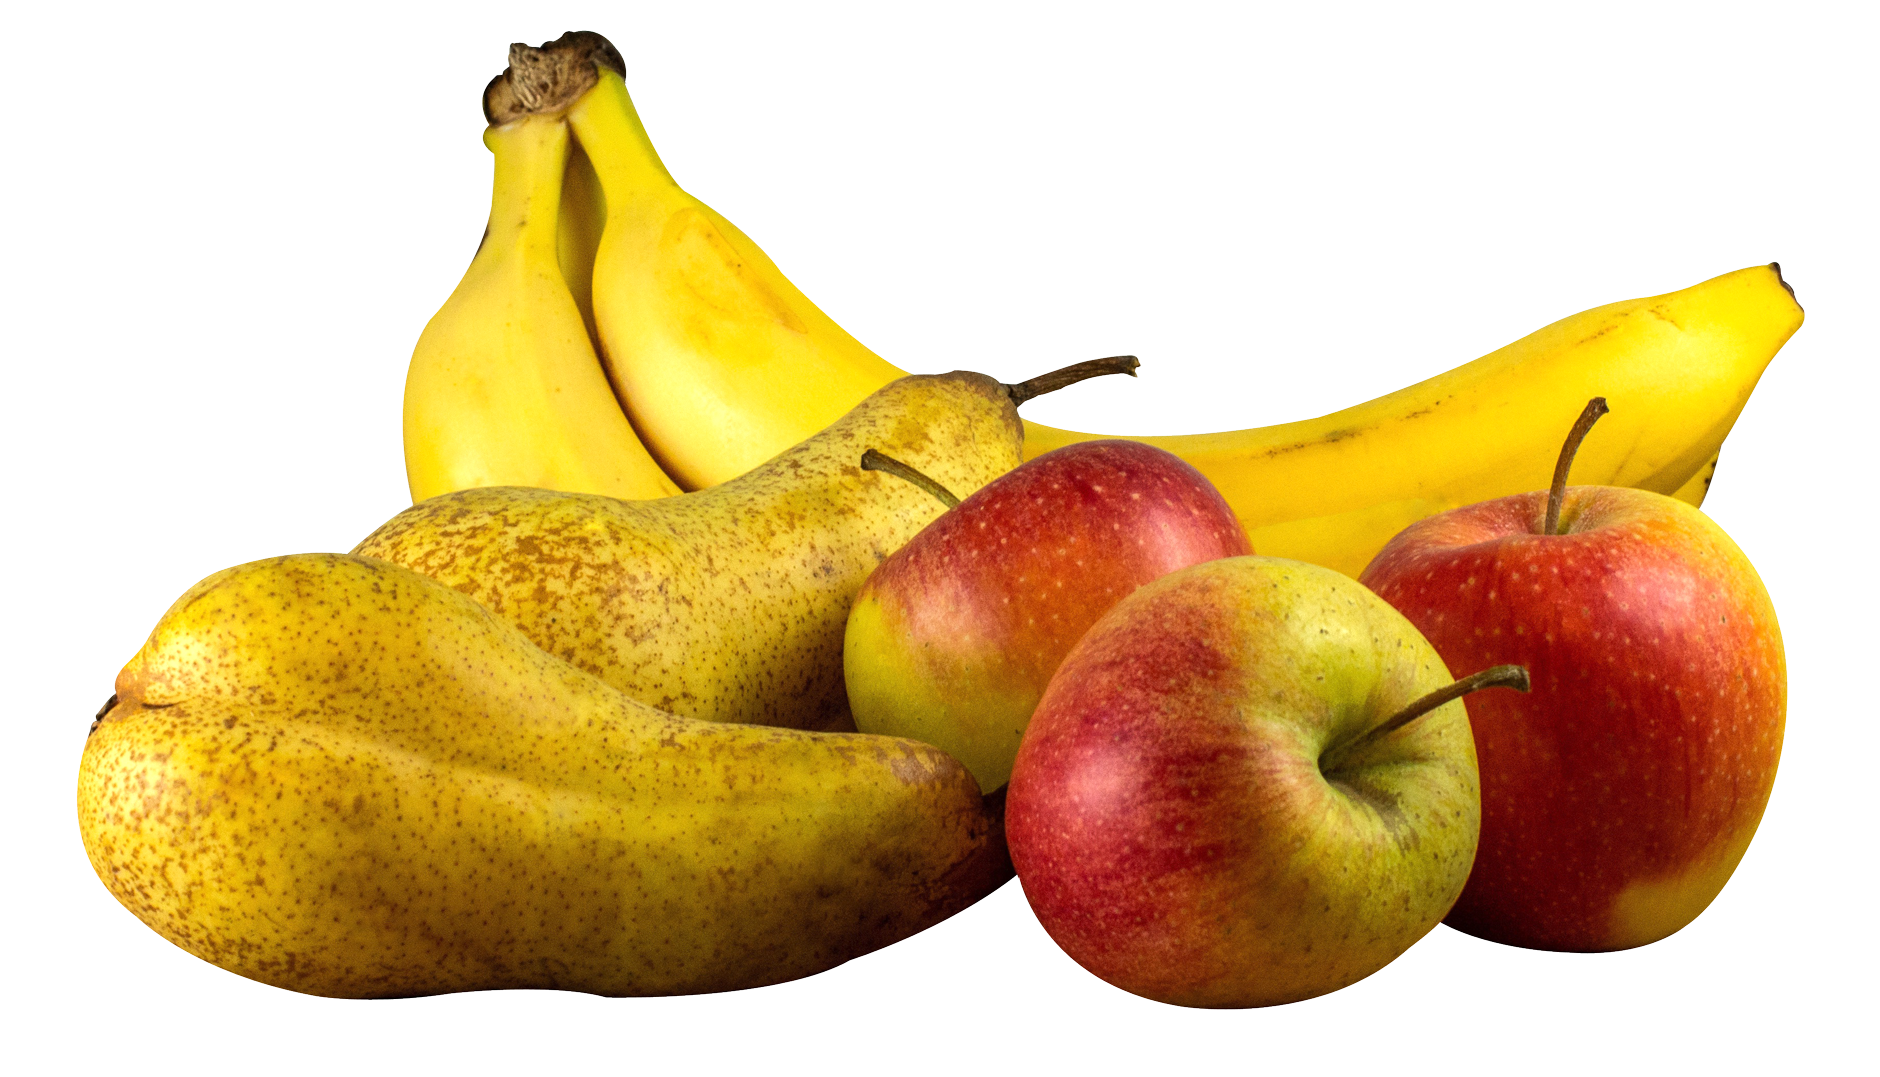 A Group Of Bananas And Apples